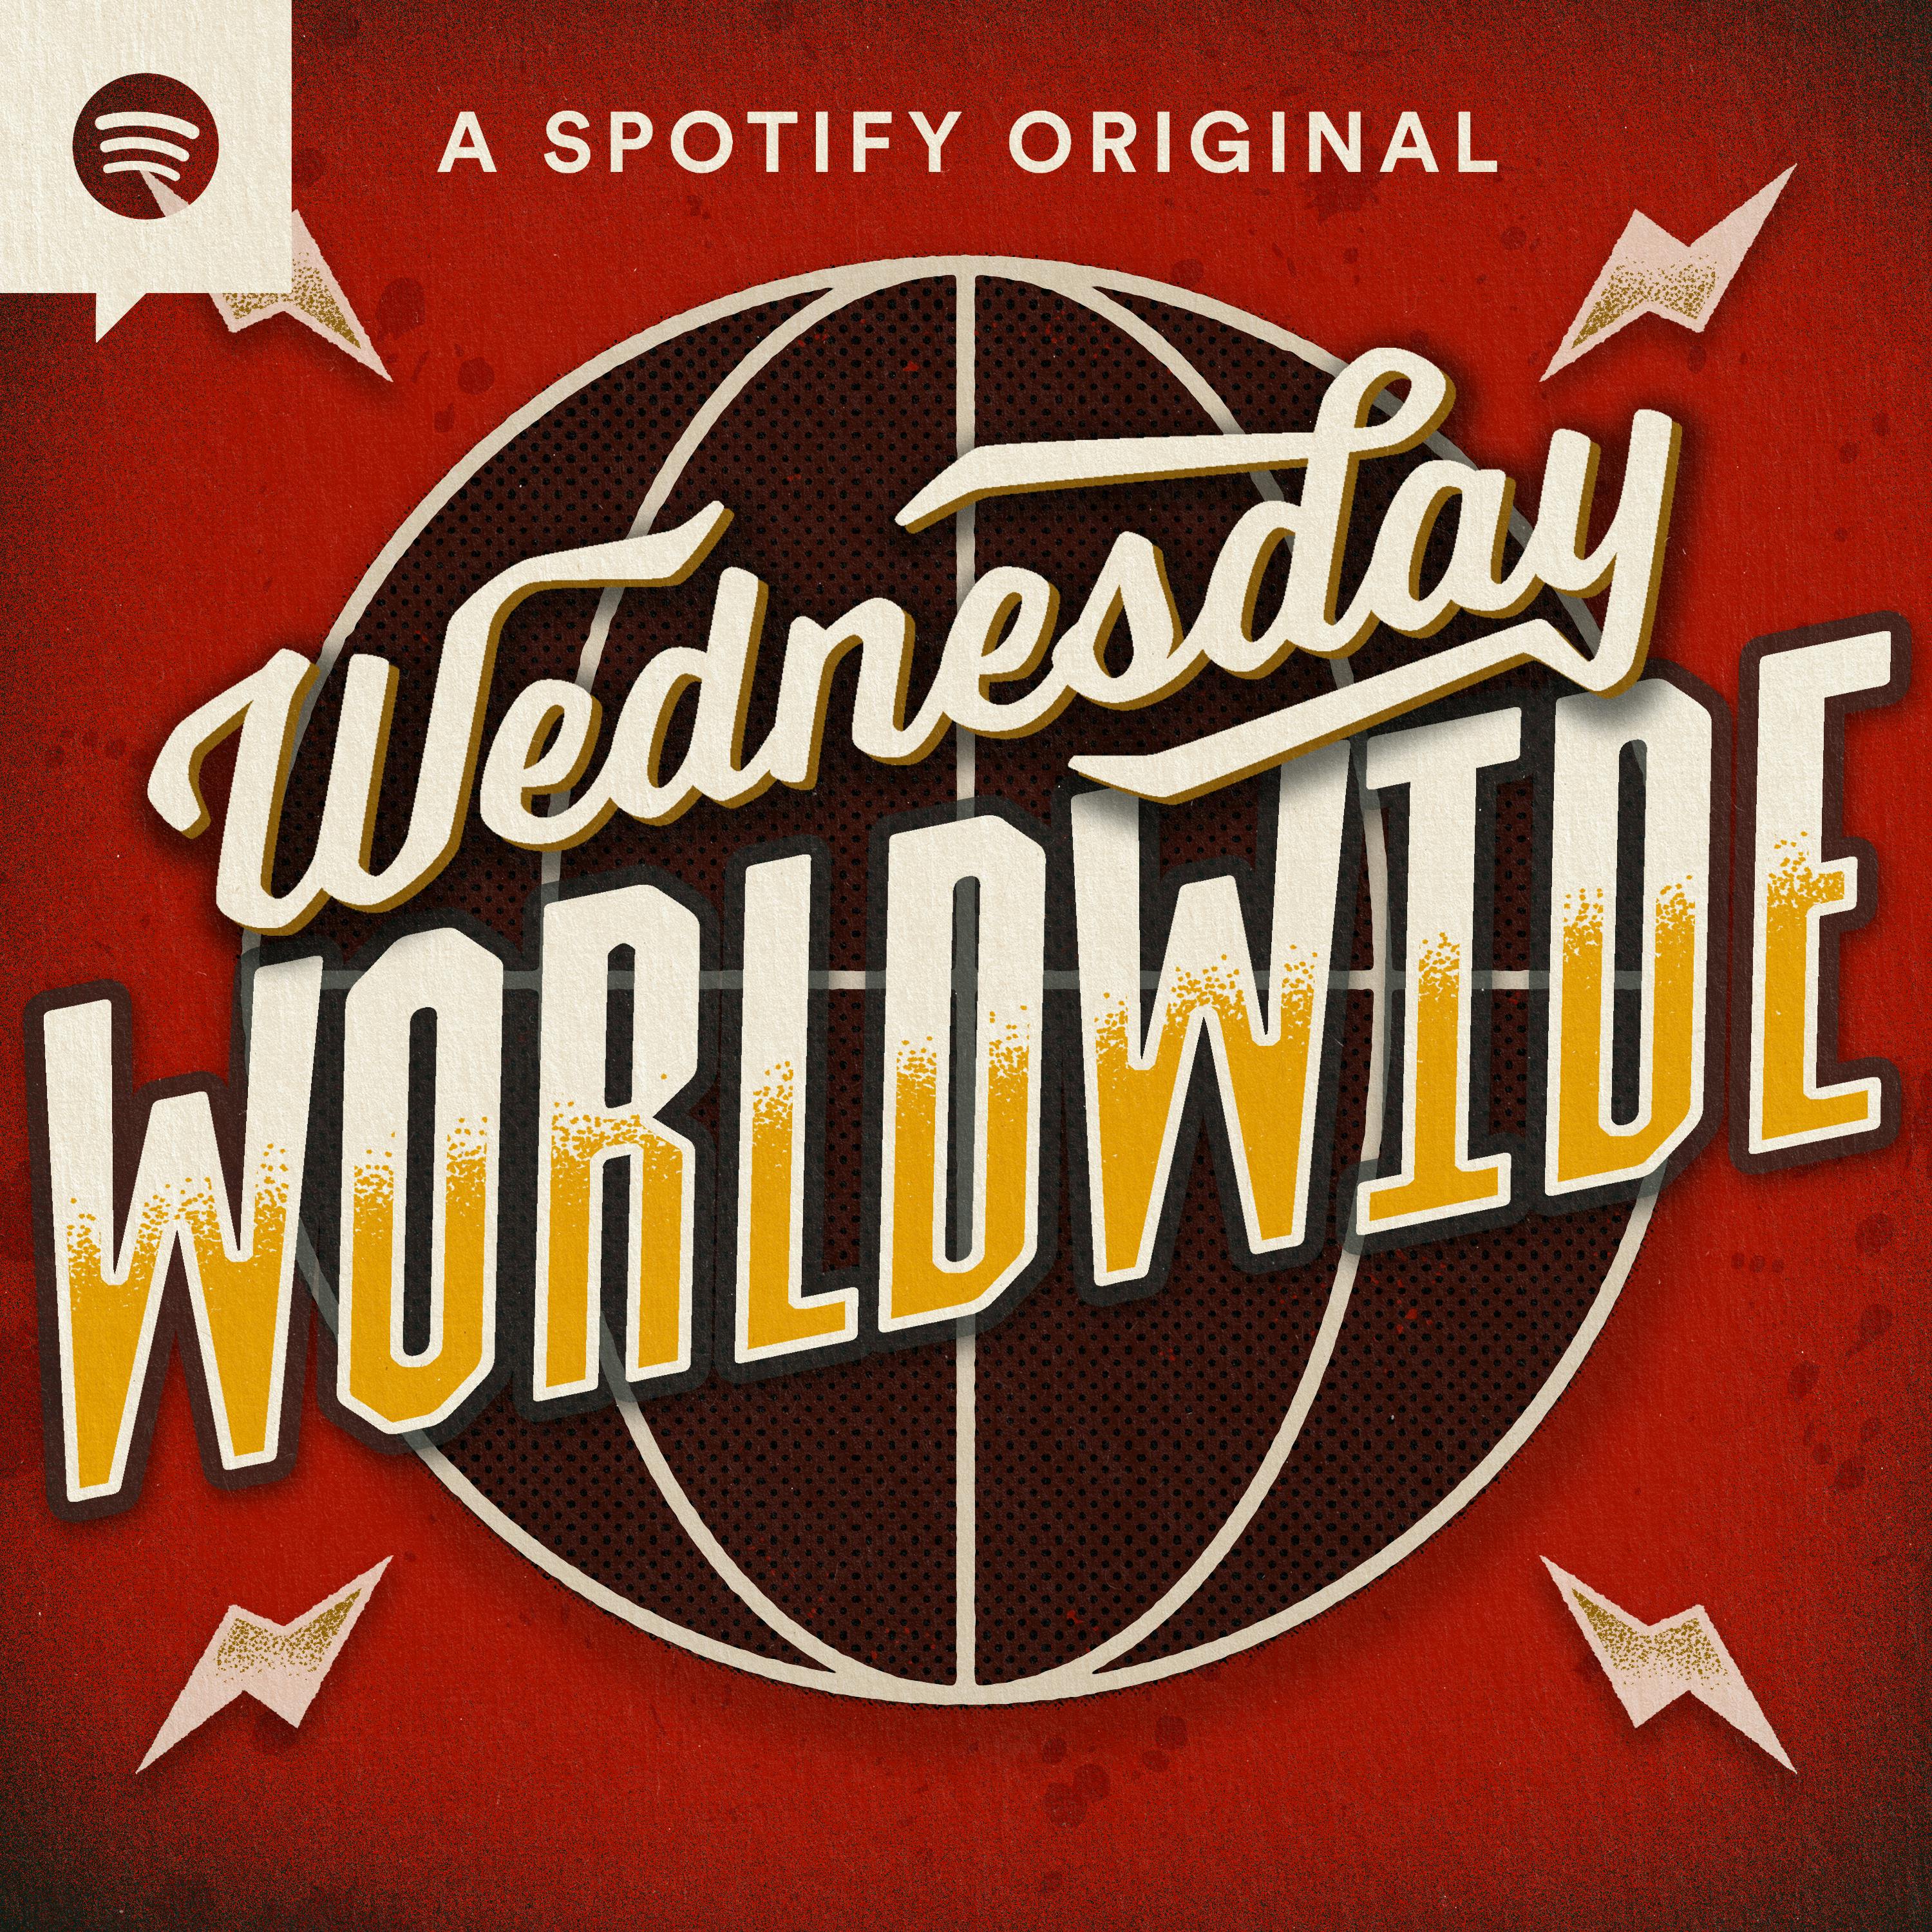 Who Is the Next Women’s World Champion? Plus, Carmelo Hayes NXT GOAT Talk. | Wednesday Worldwide